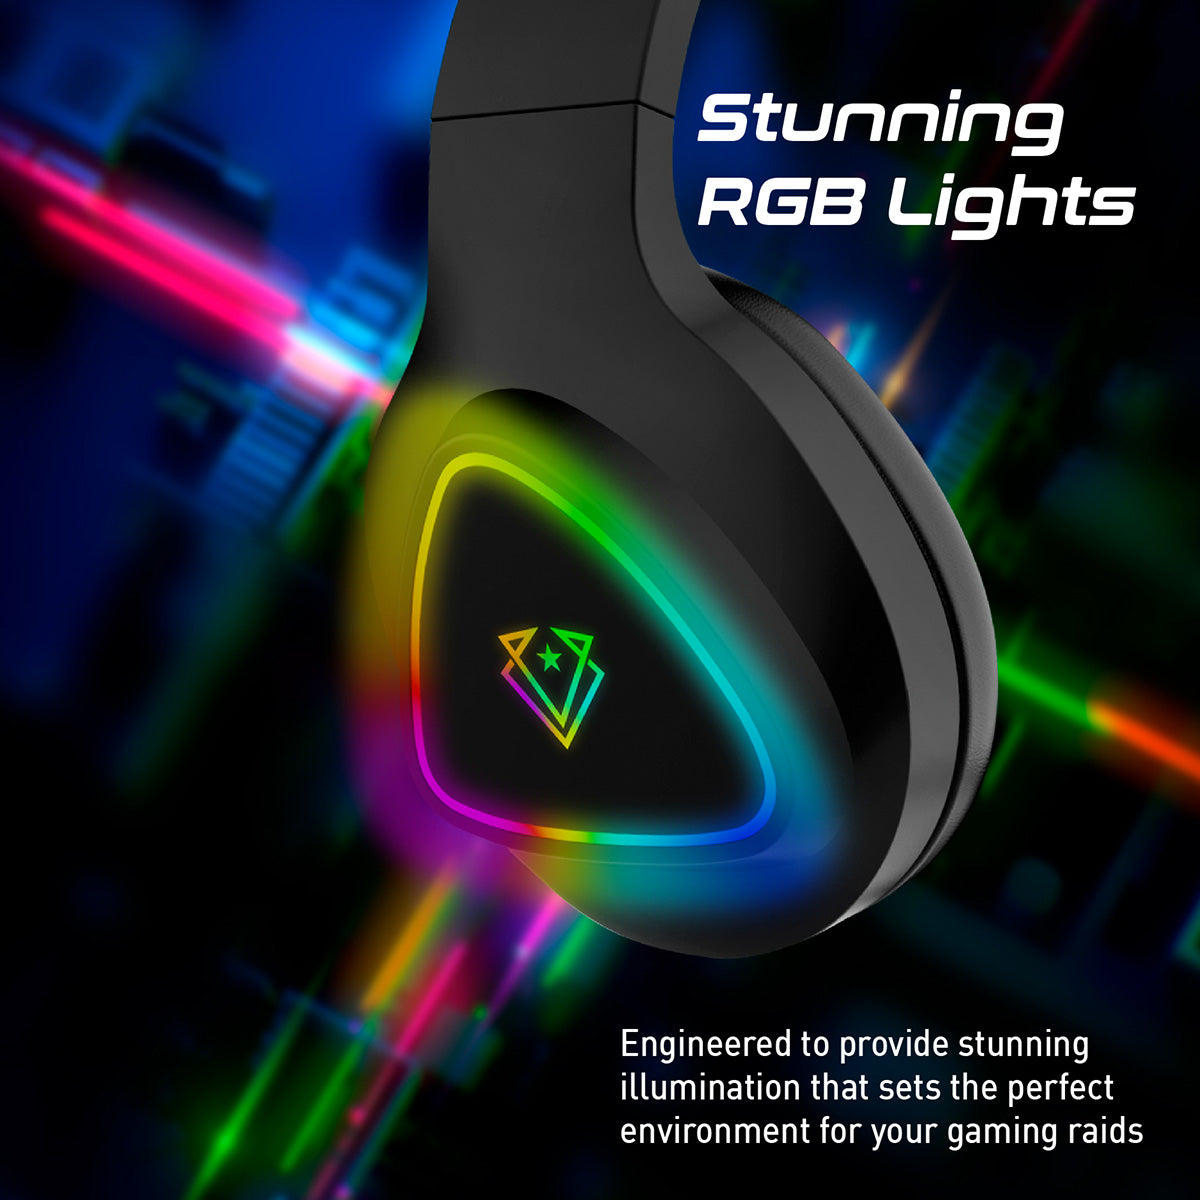 Stereo Immersive Pro Gaming Over-Ear Headset